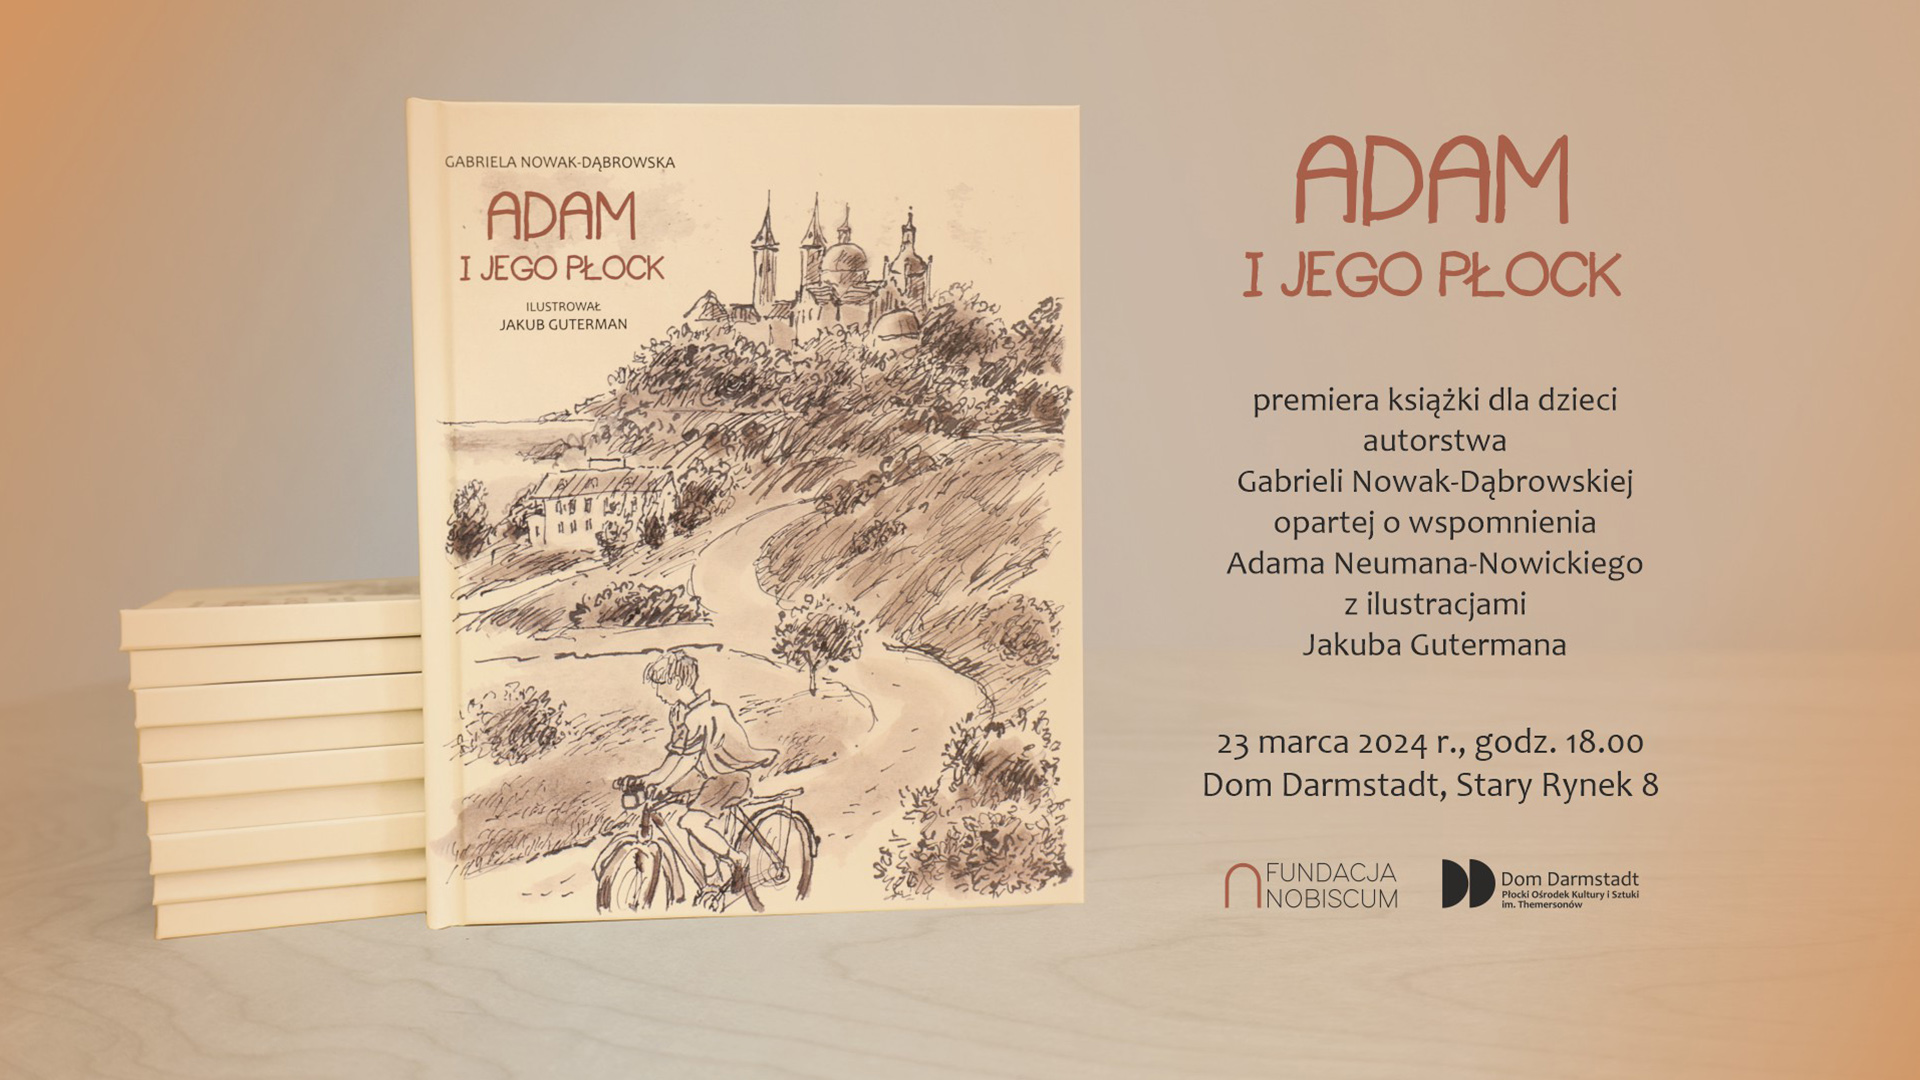 “Adam and his Płock” – premiere of the book on 23 March